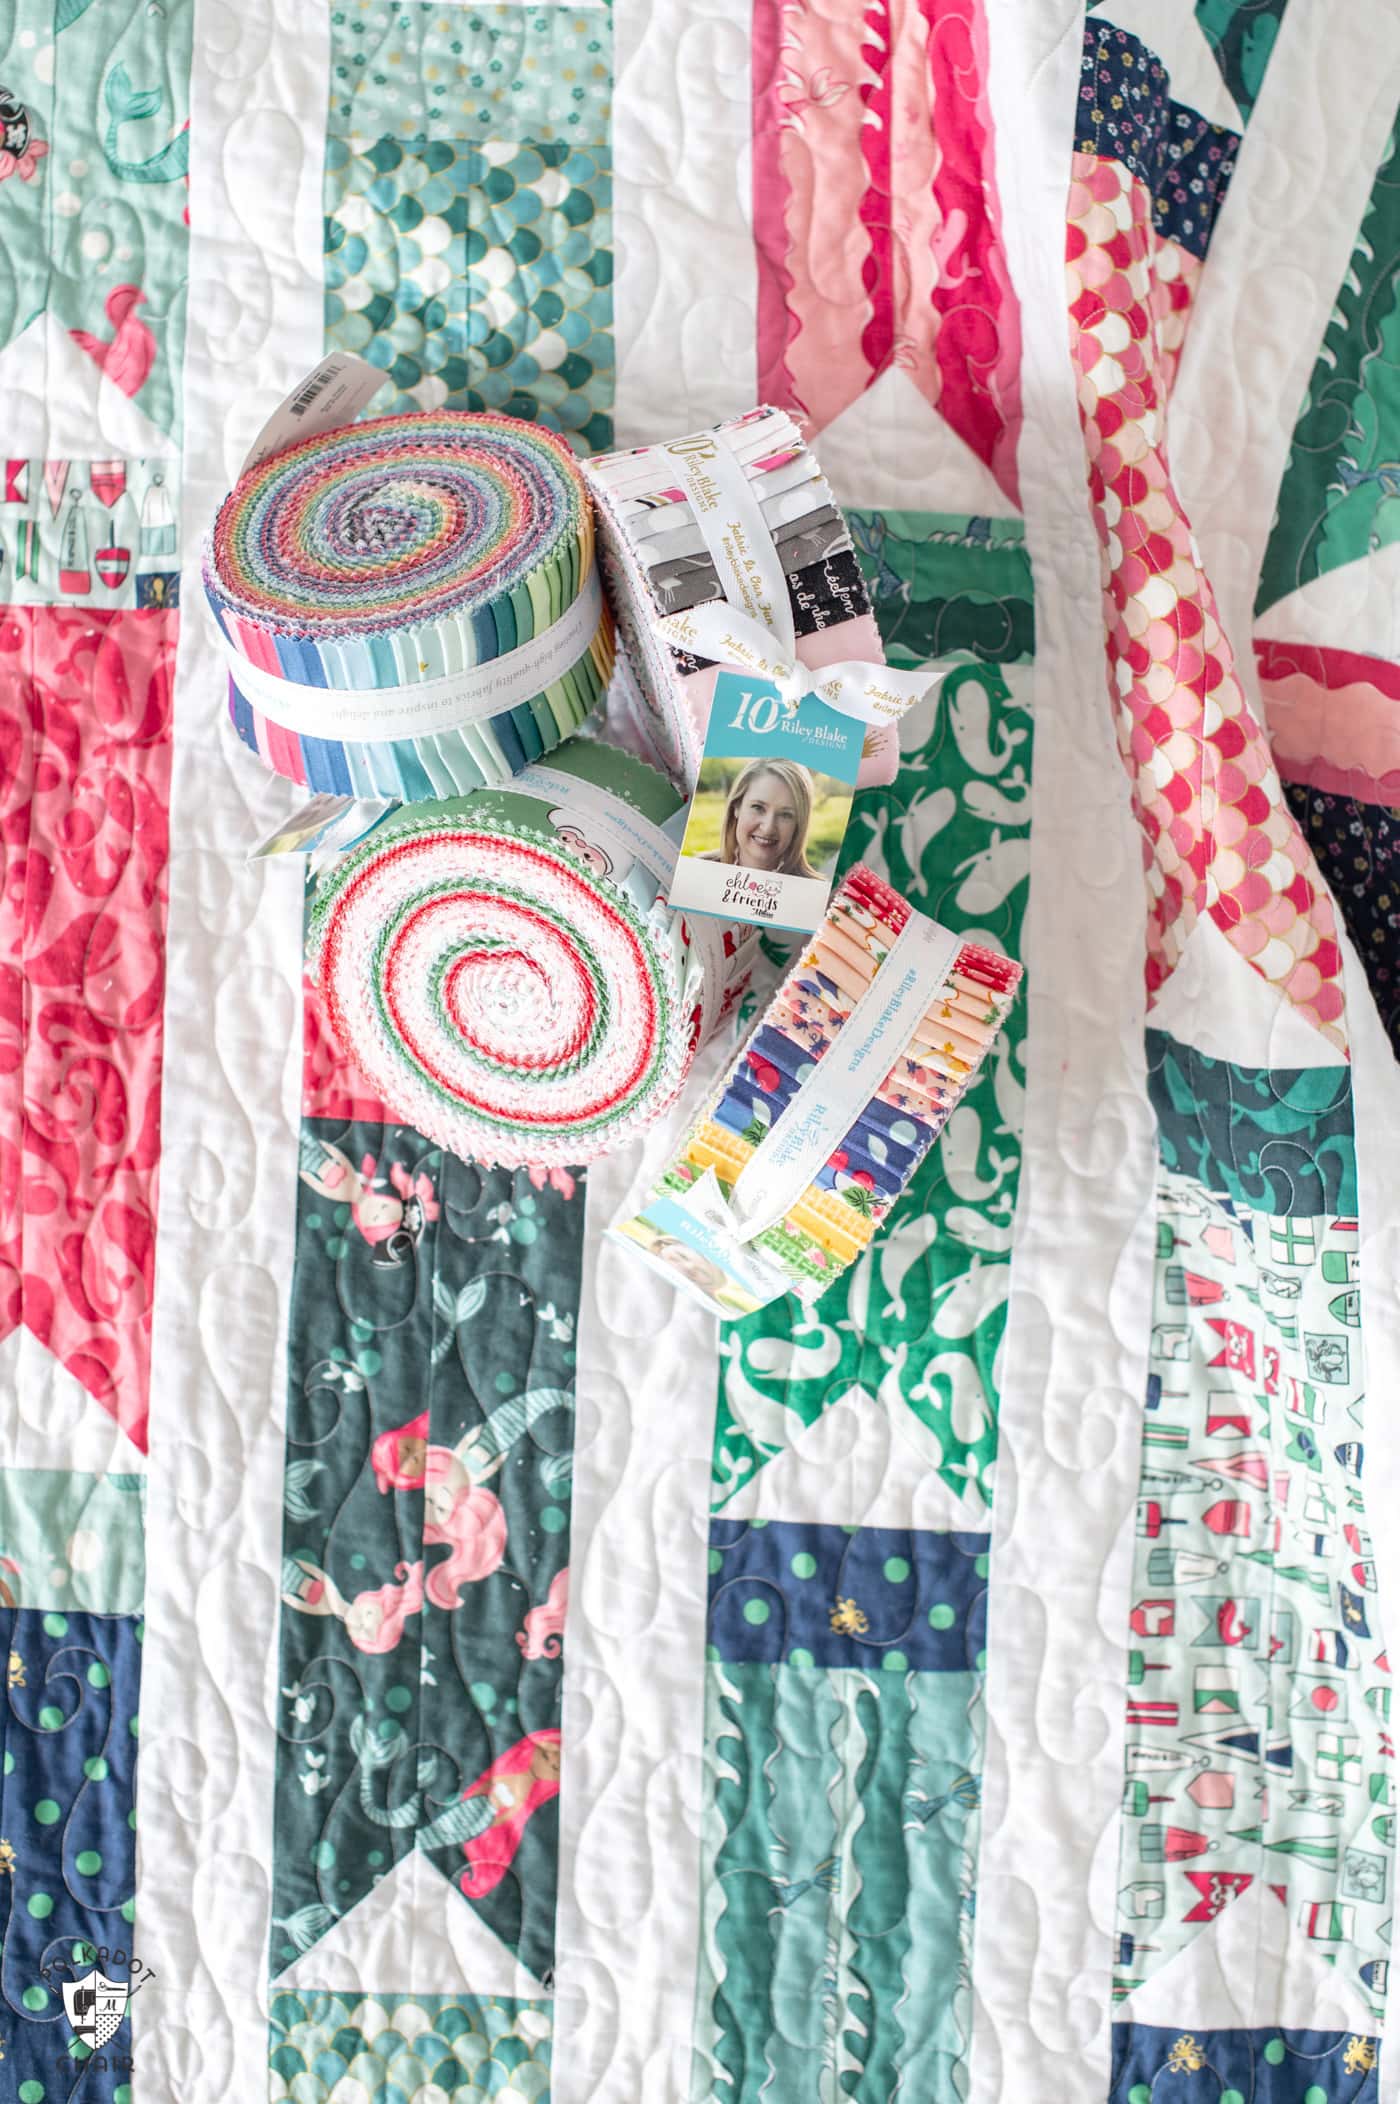 precut rolls of fabric on top of colorful quilt